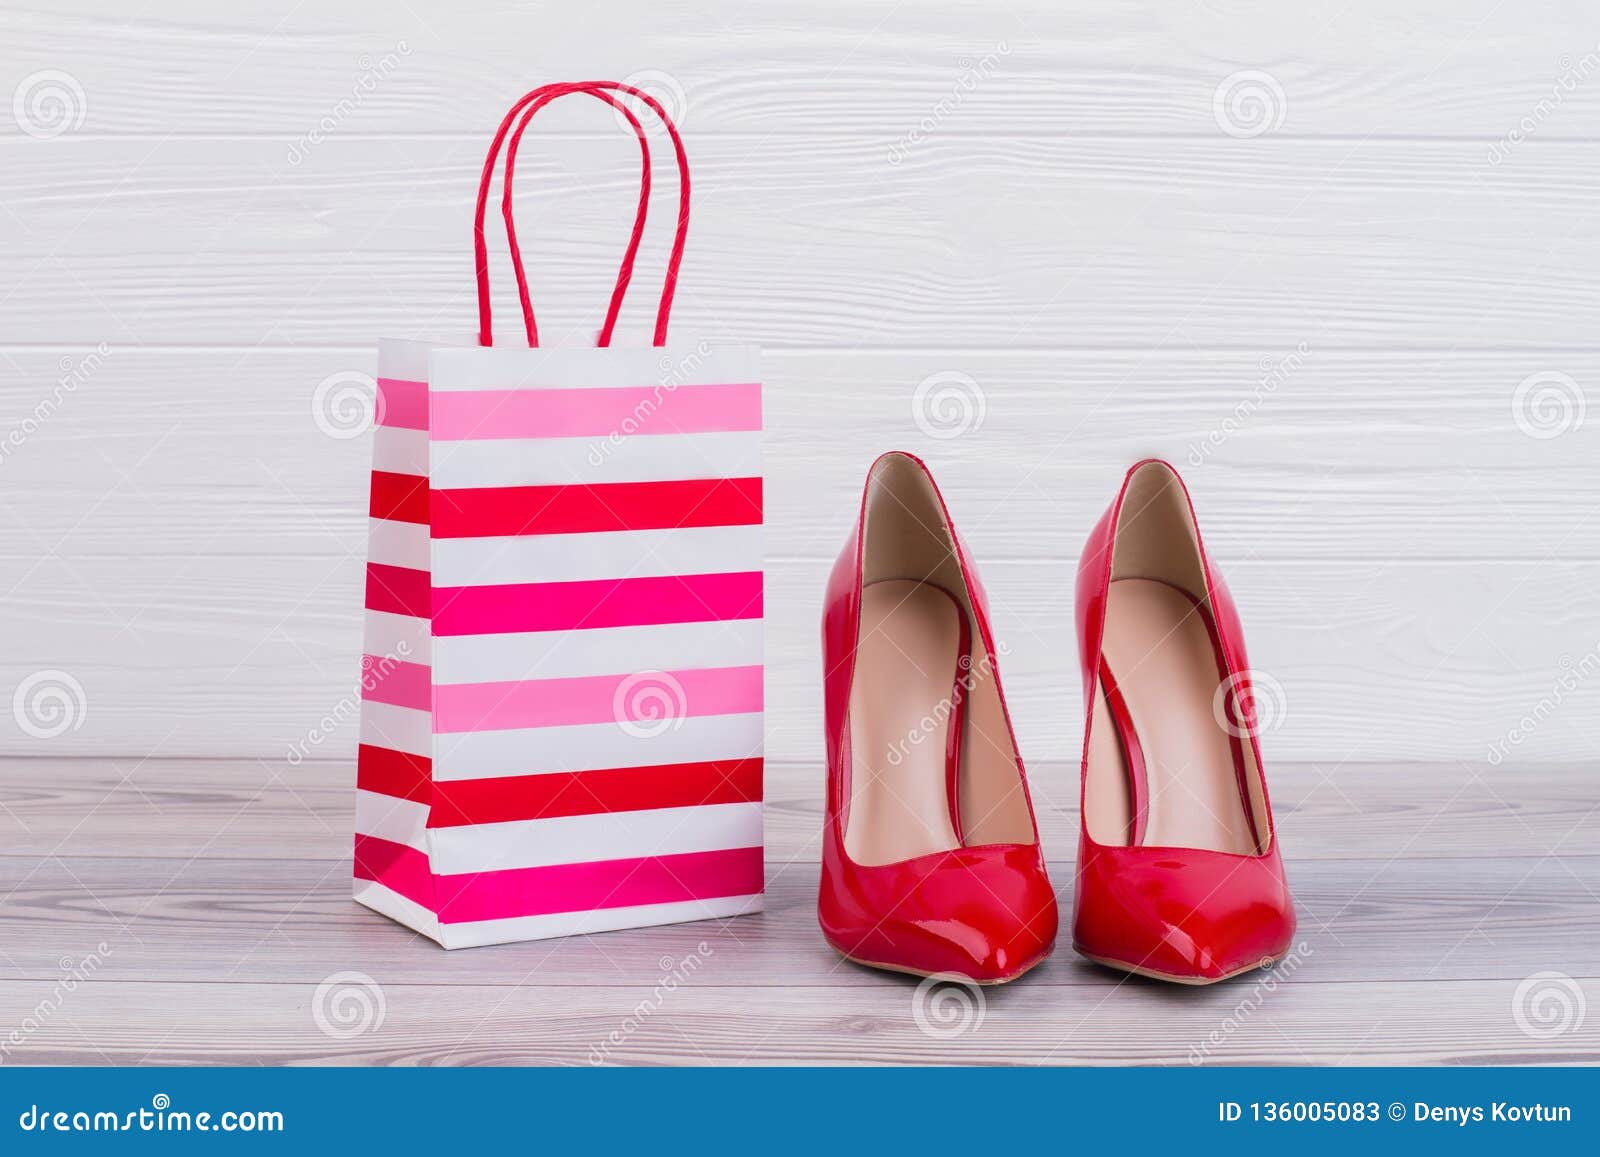 Red Stilettos and Paper Gift Bag. Stock Image - Image of business ...